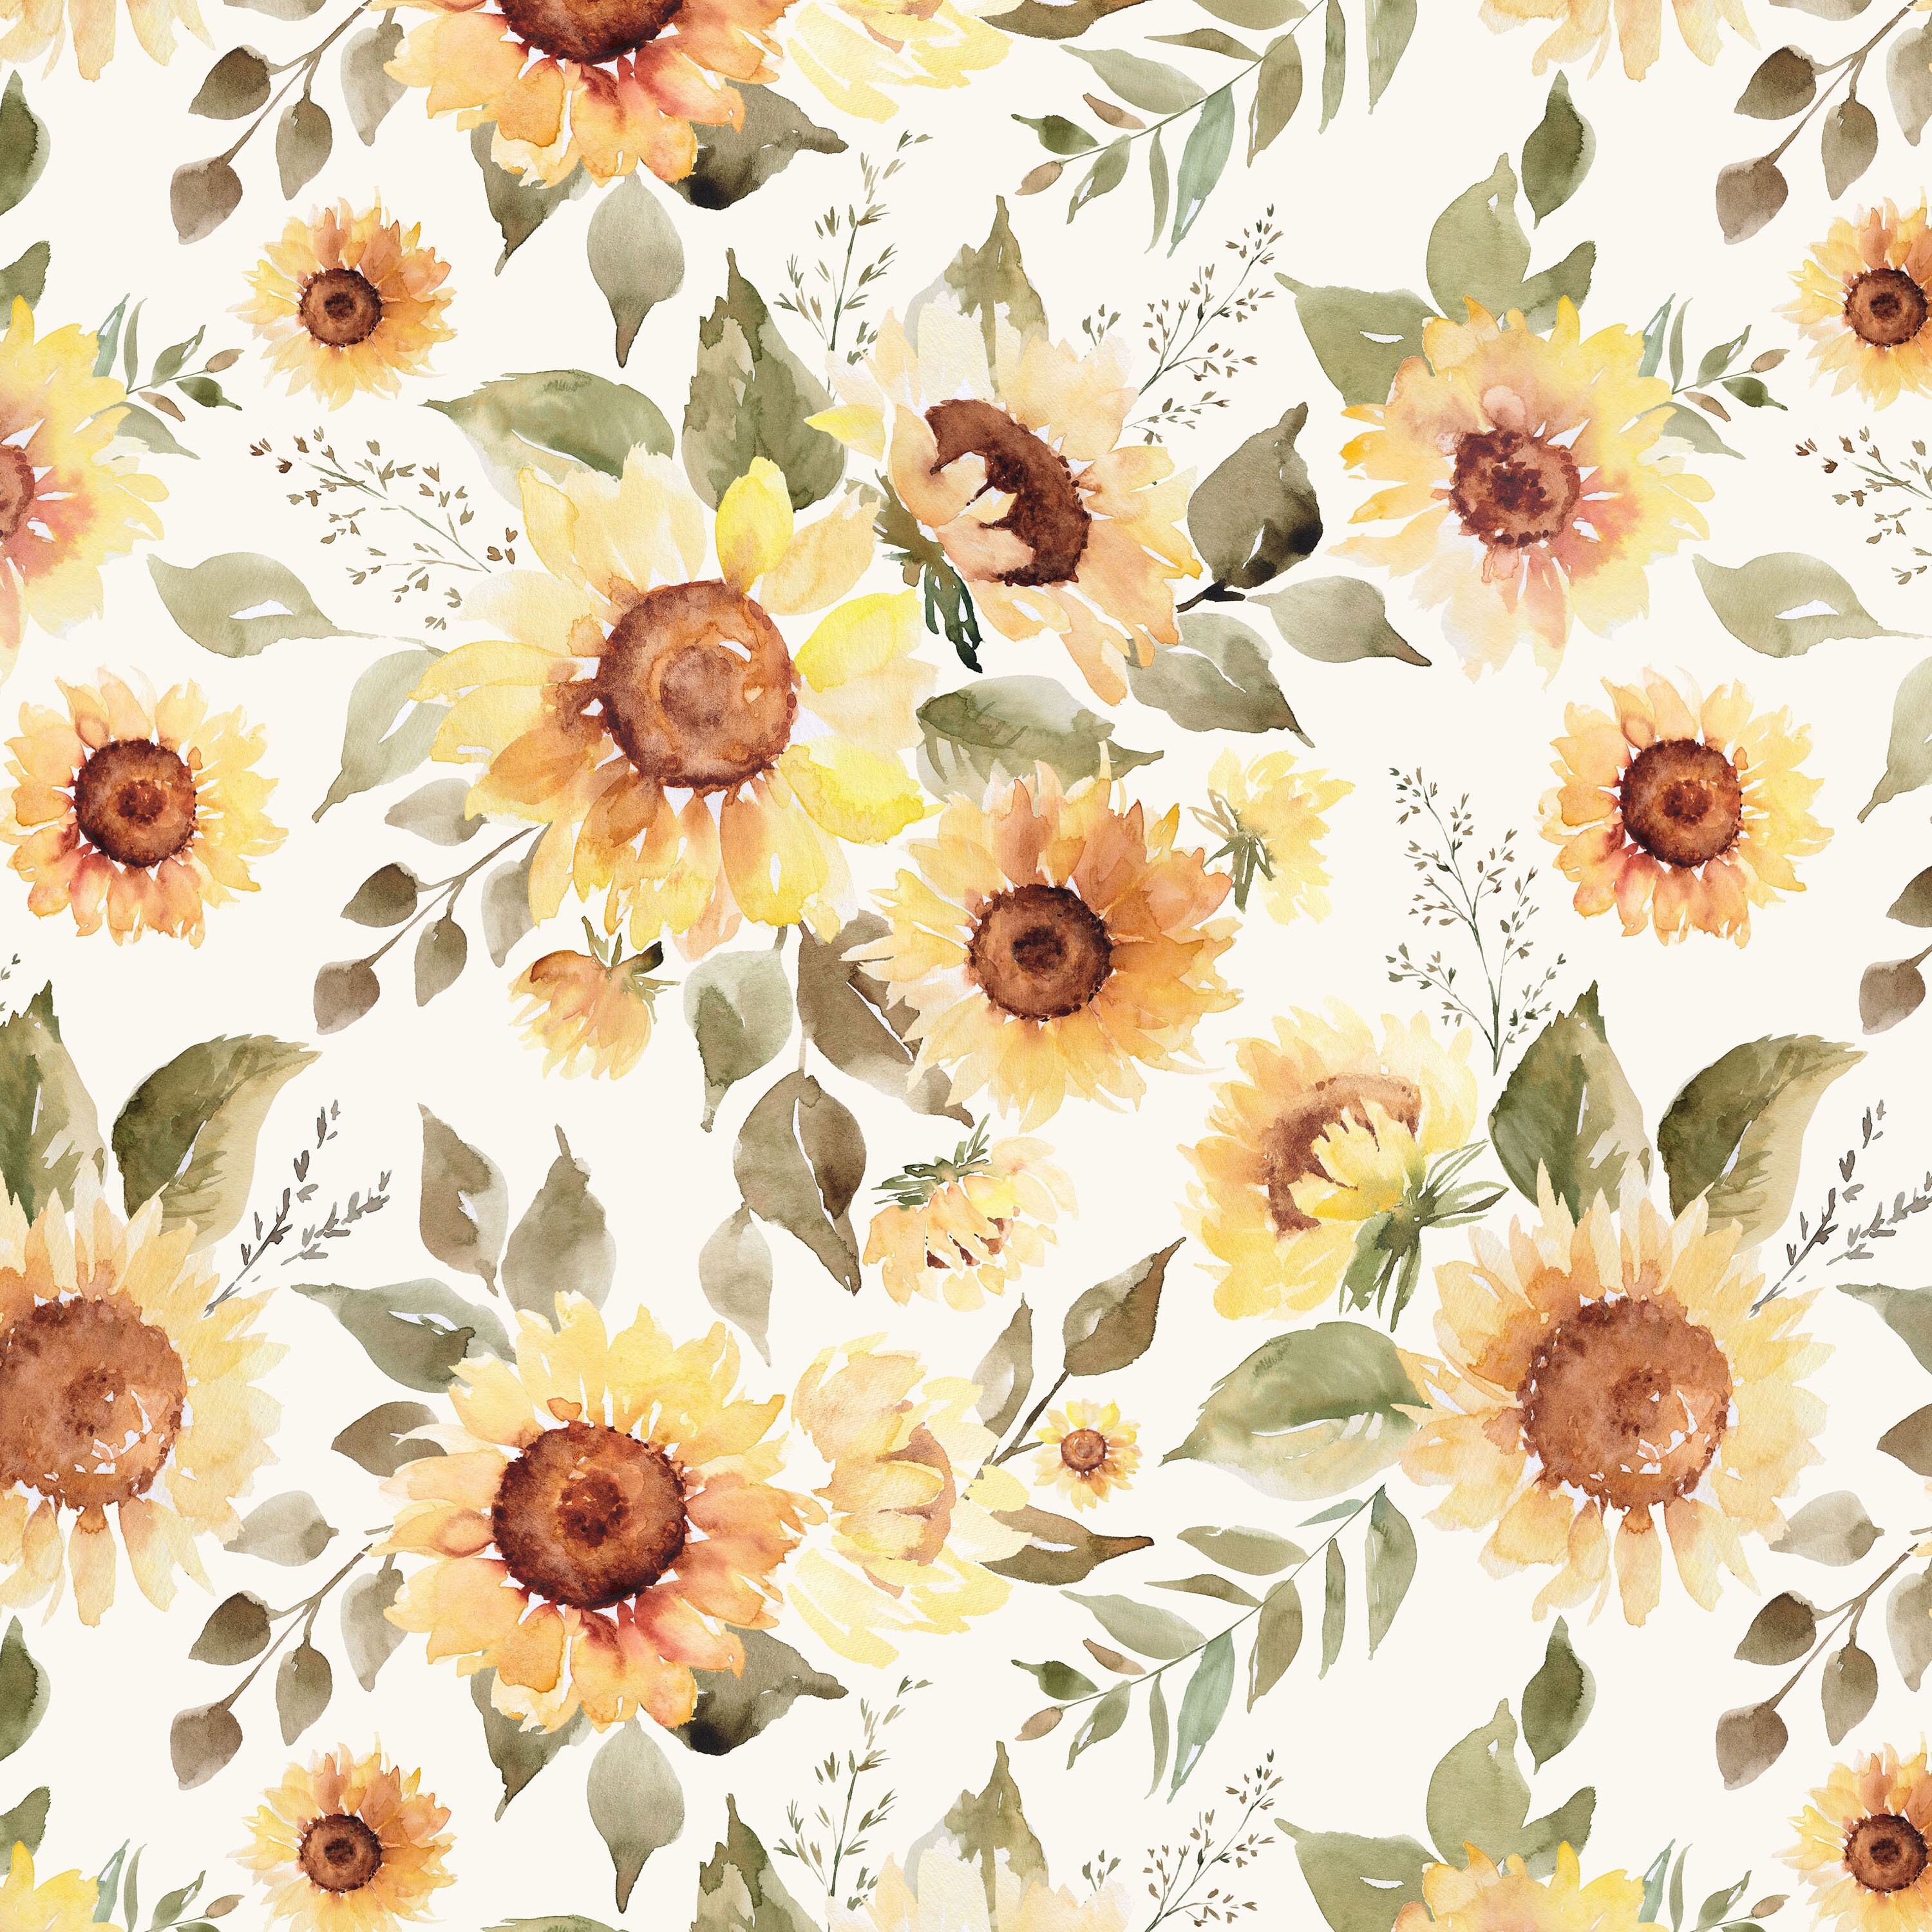 Sunflower cotton fabric by the yard